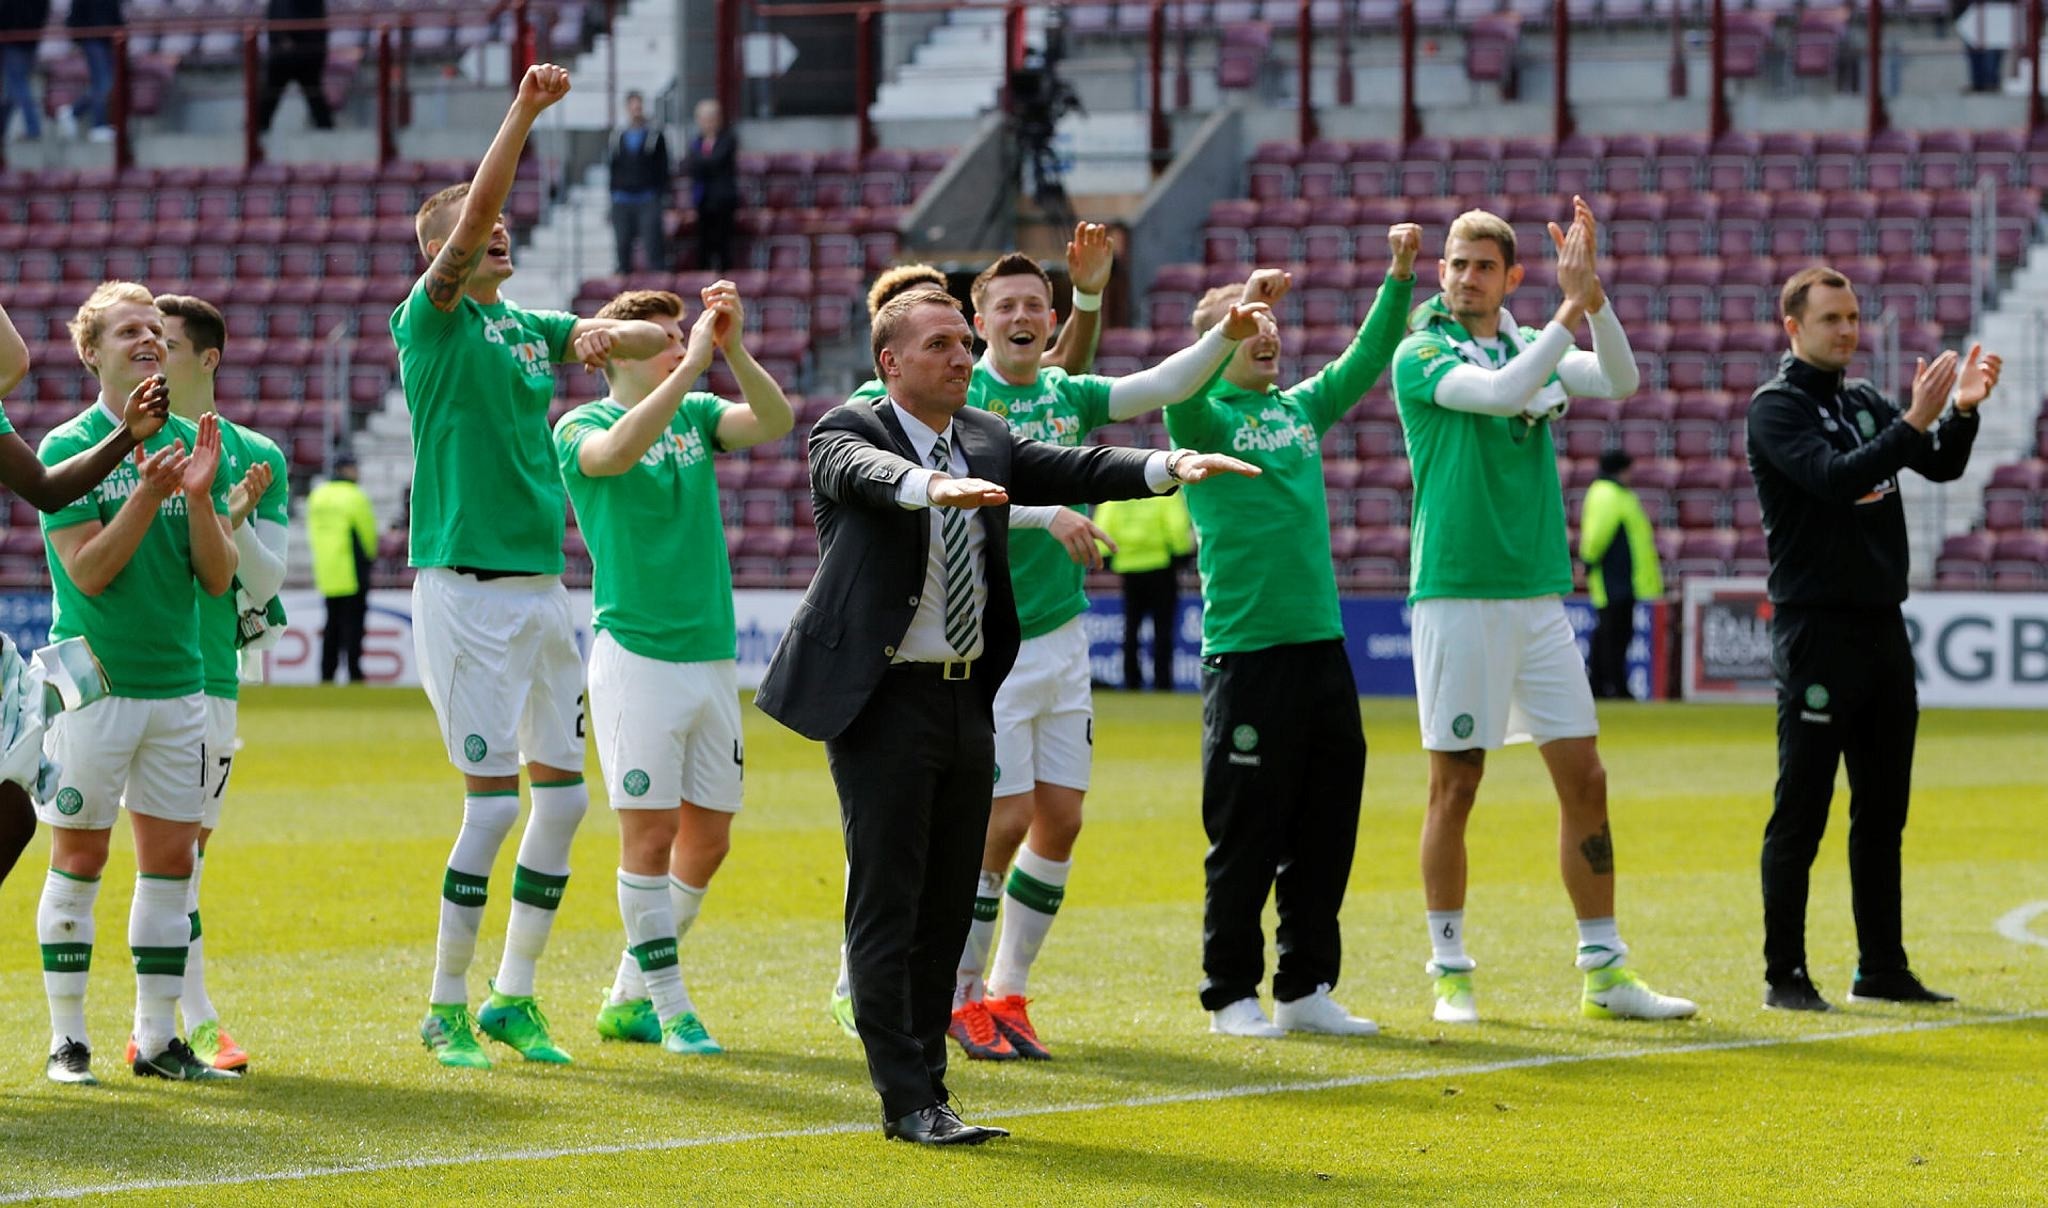 Celtic manager Brendan Rodgers and their players celebrate winning the Scottish Premiership. (Reuters Photo)